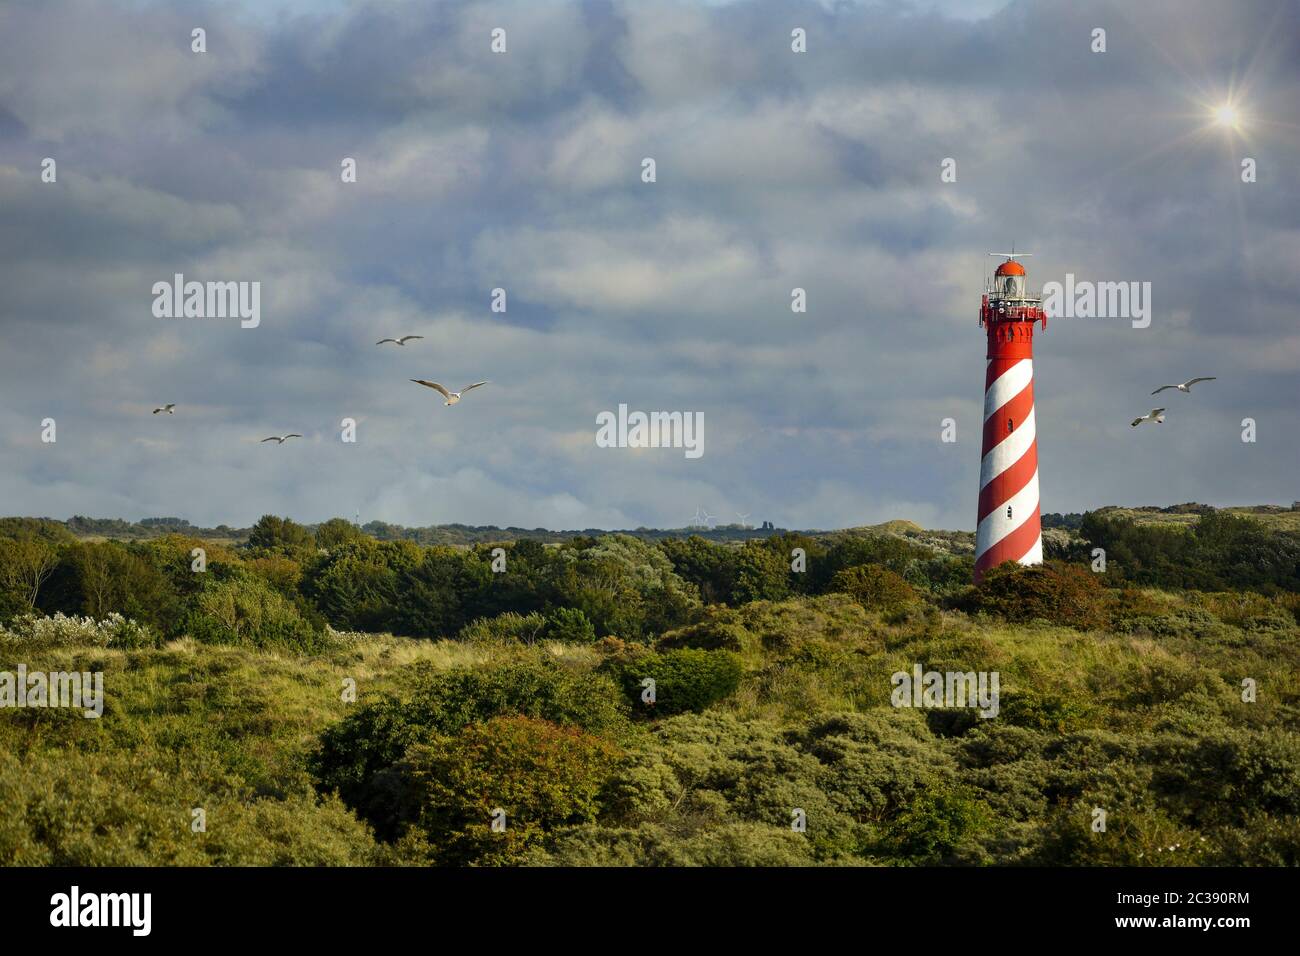 The 53-metre-high lighthouse Westerlichttoren in Nieuw Haamstede in the Netherlands on Zeeland with gulls, sun, sunrays  and copy space Stock Photo